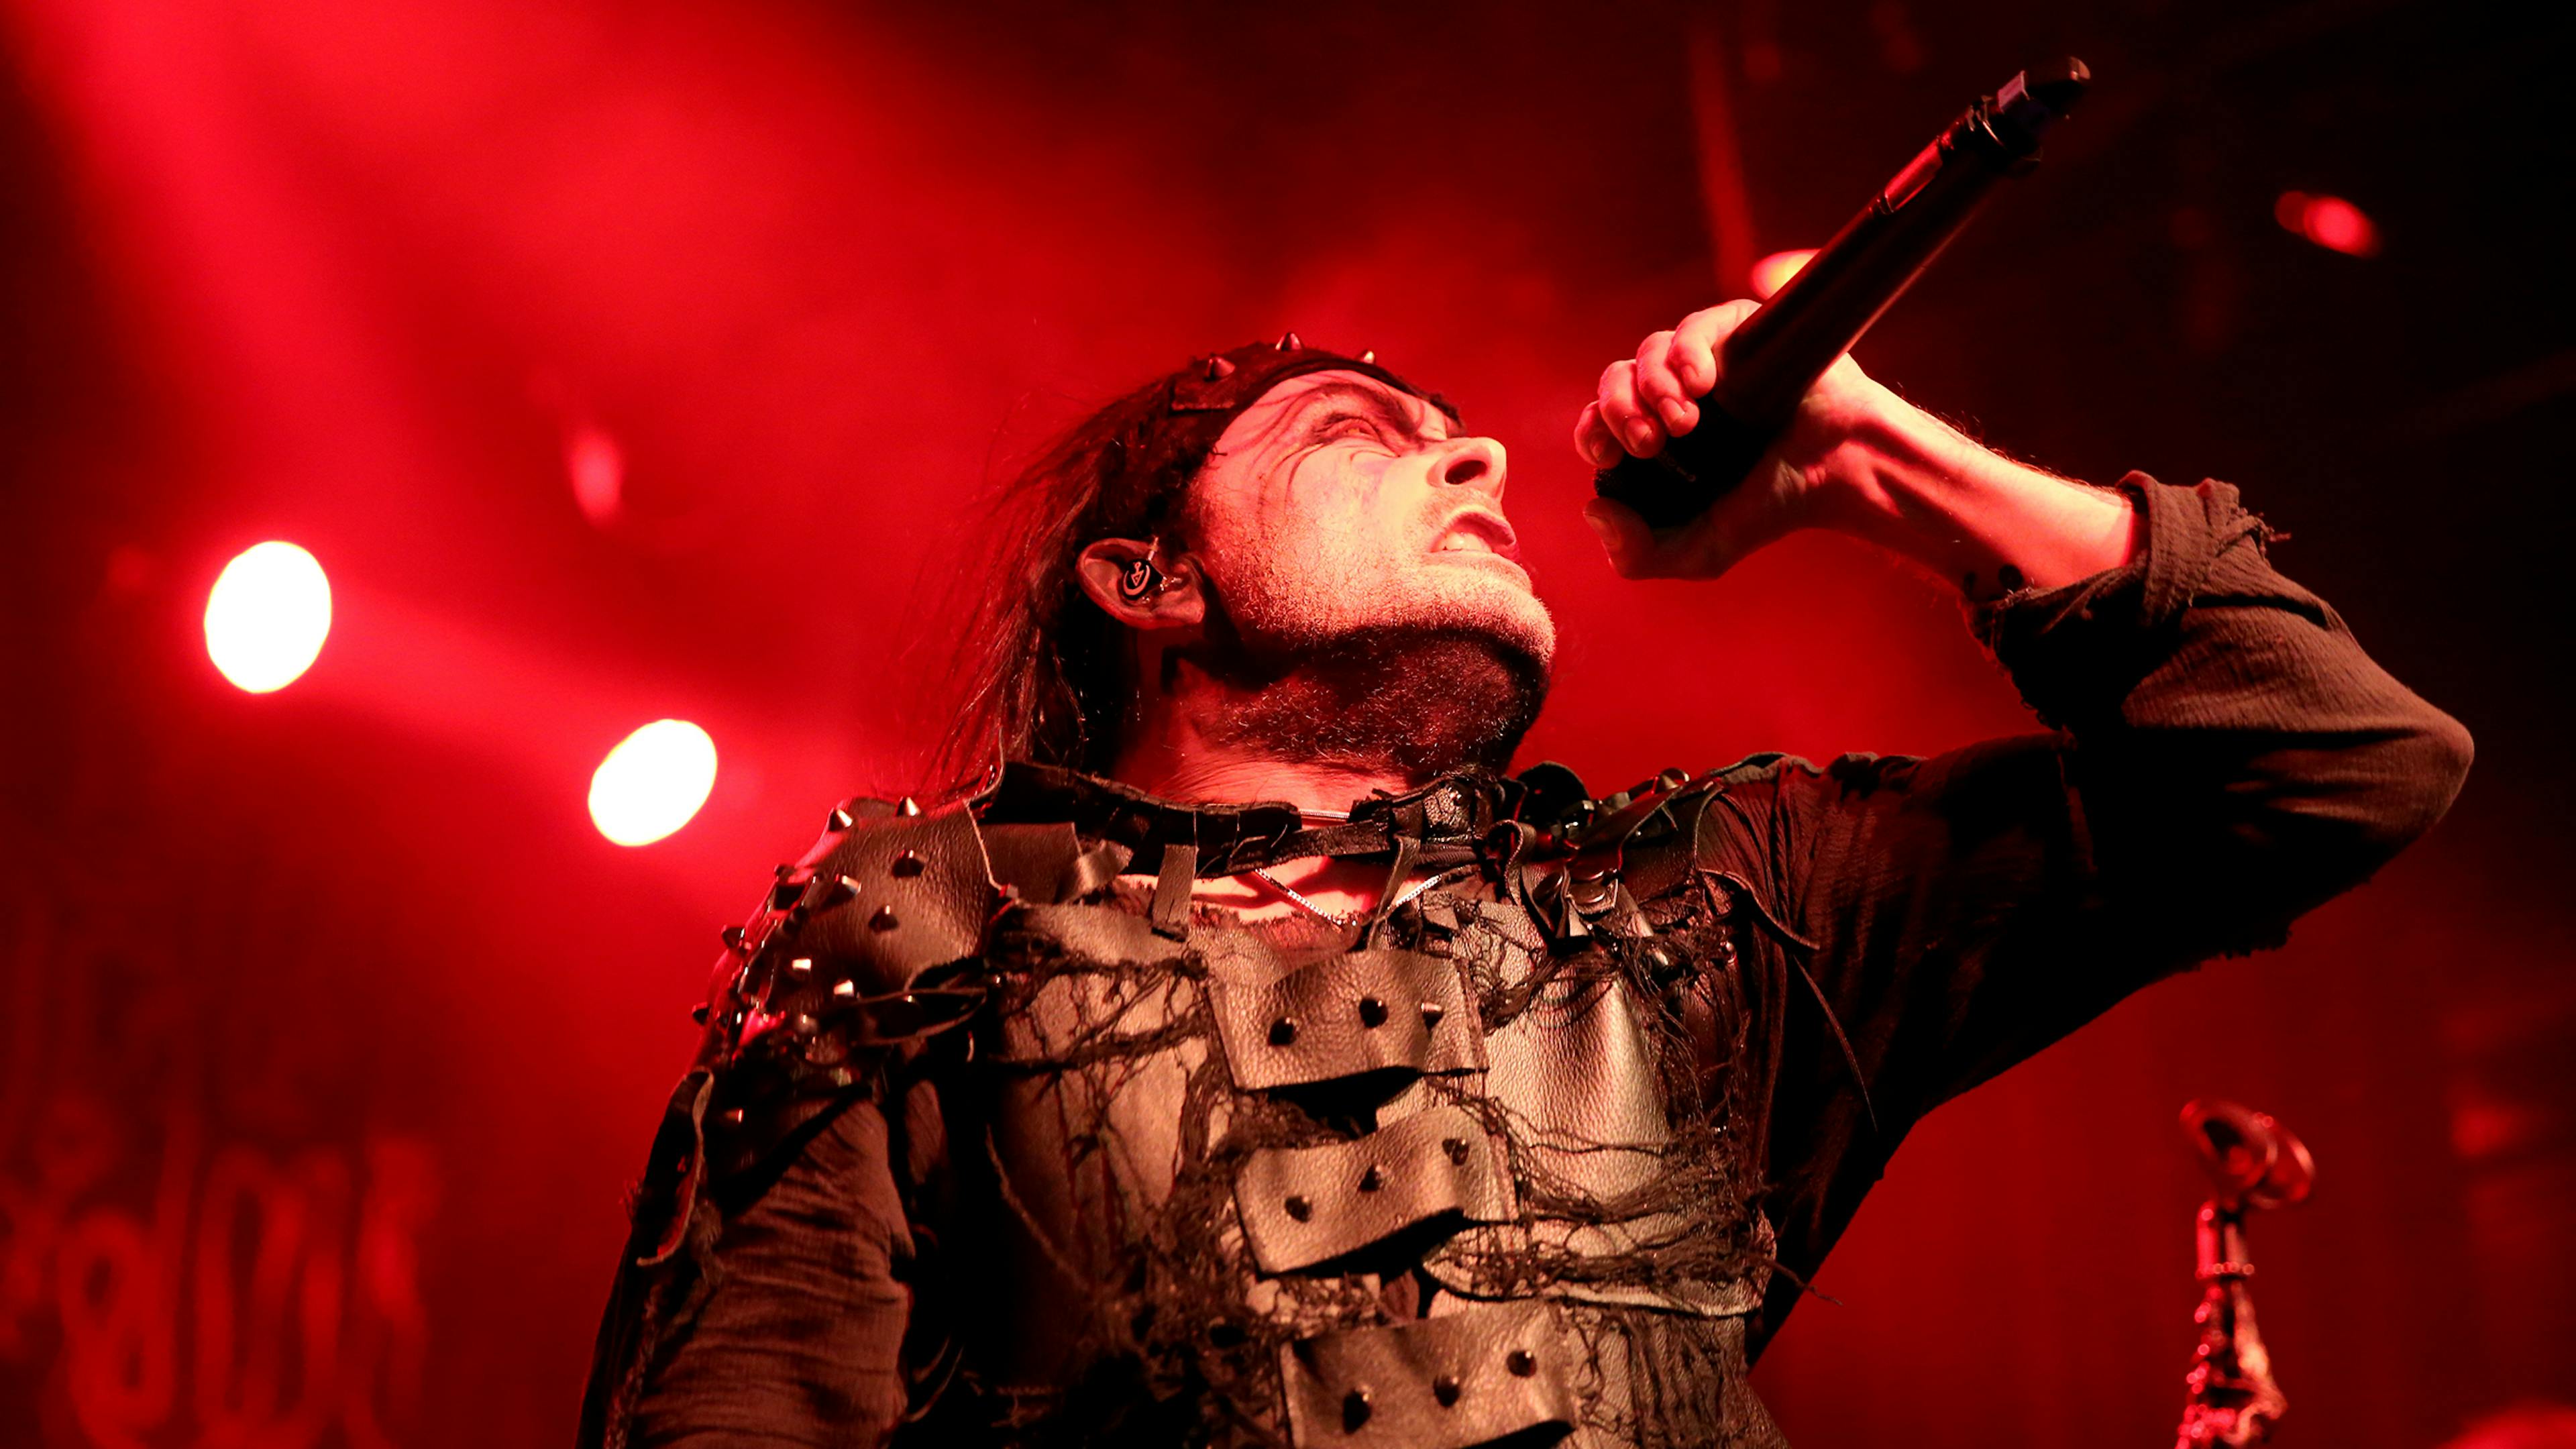 Cradle Of Filth announce 2024 European tour, with special guest Wednesday 13 performing a Murderdolls set